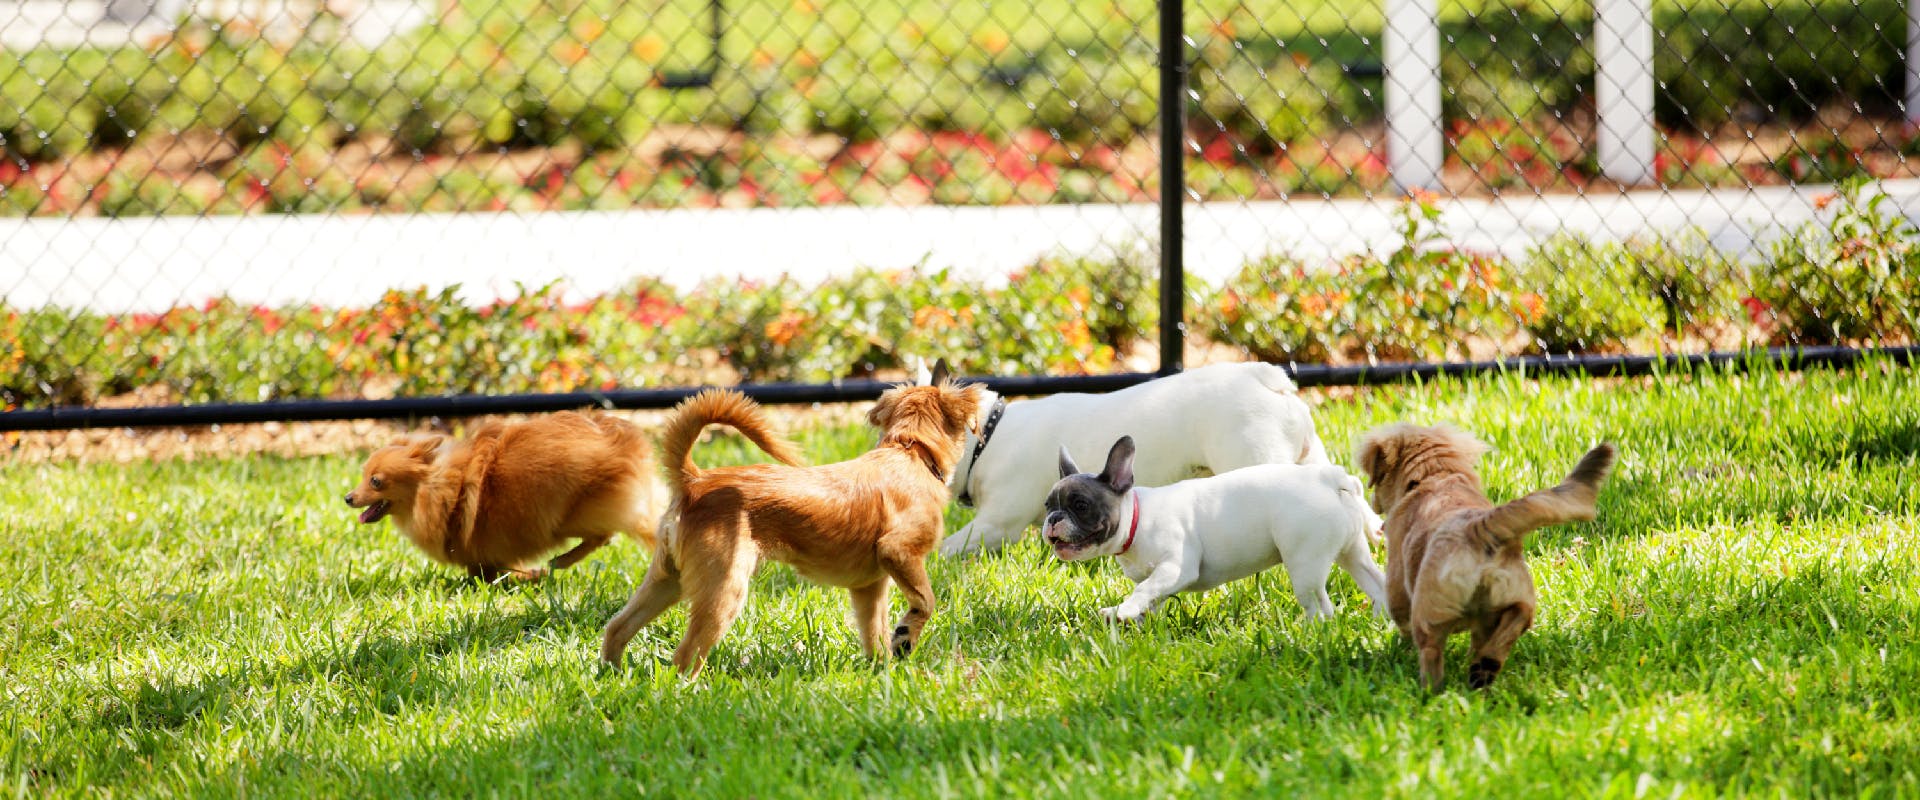 A group of dogs play in a dog park.